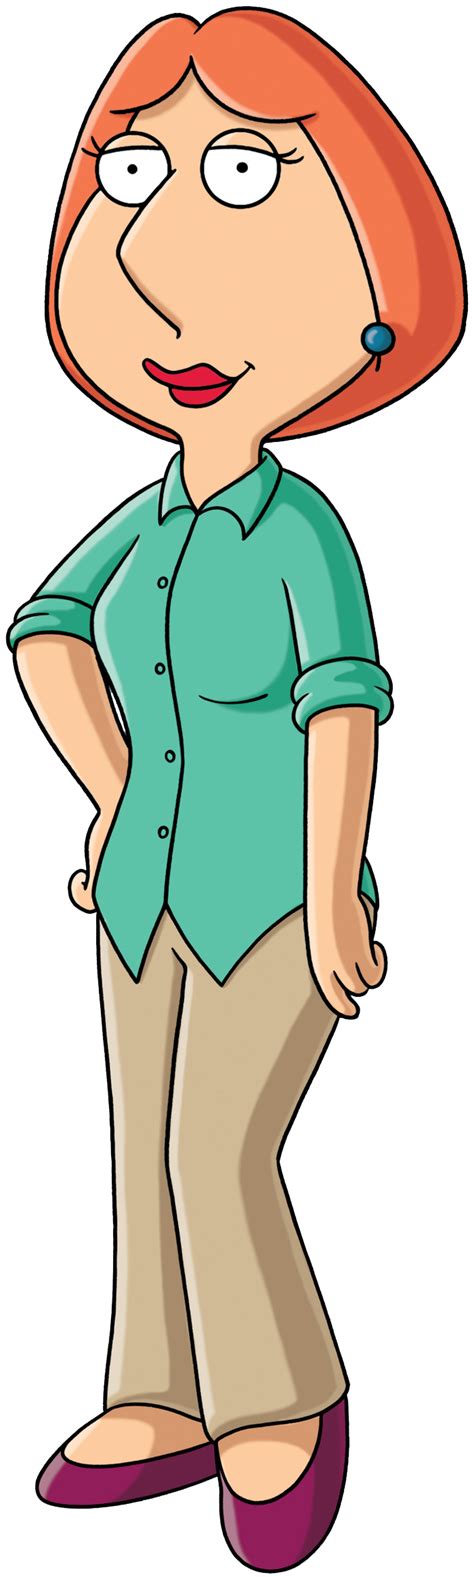 A Gag Gift For Him Or Her. . Lois griffin png